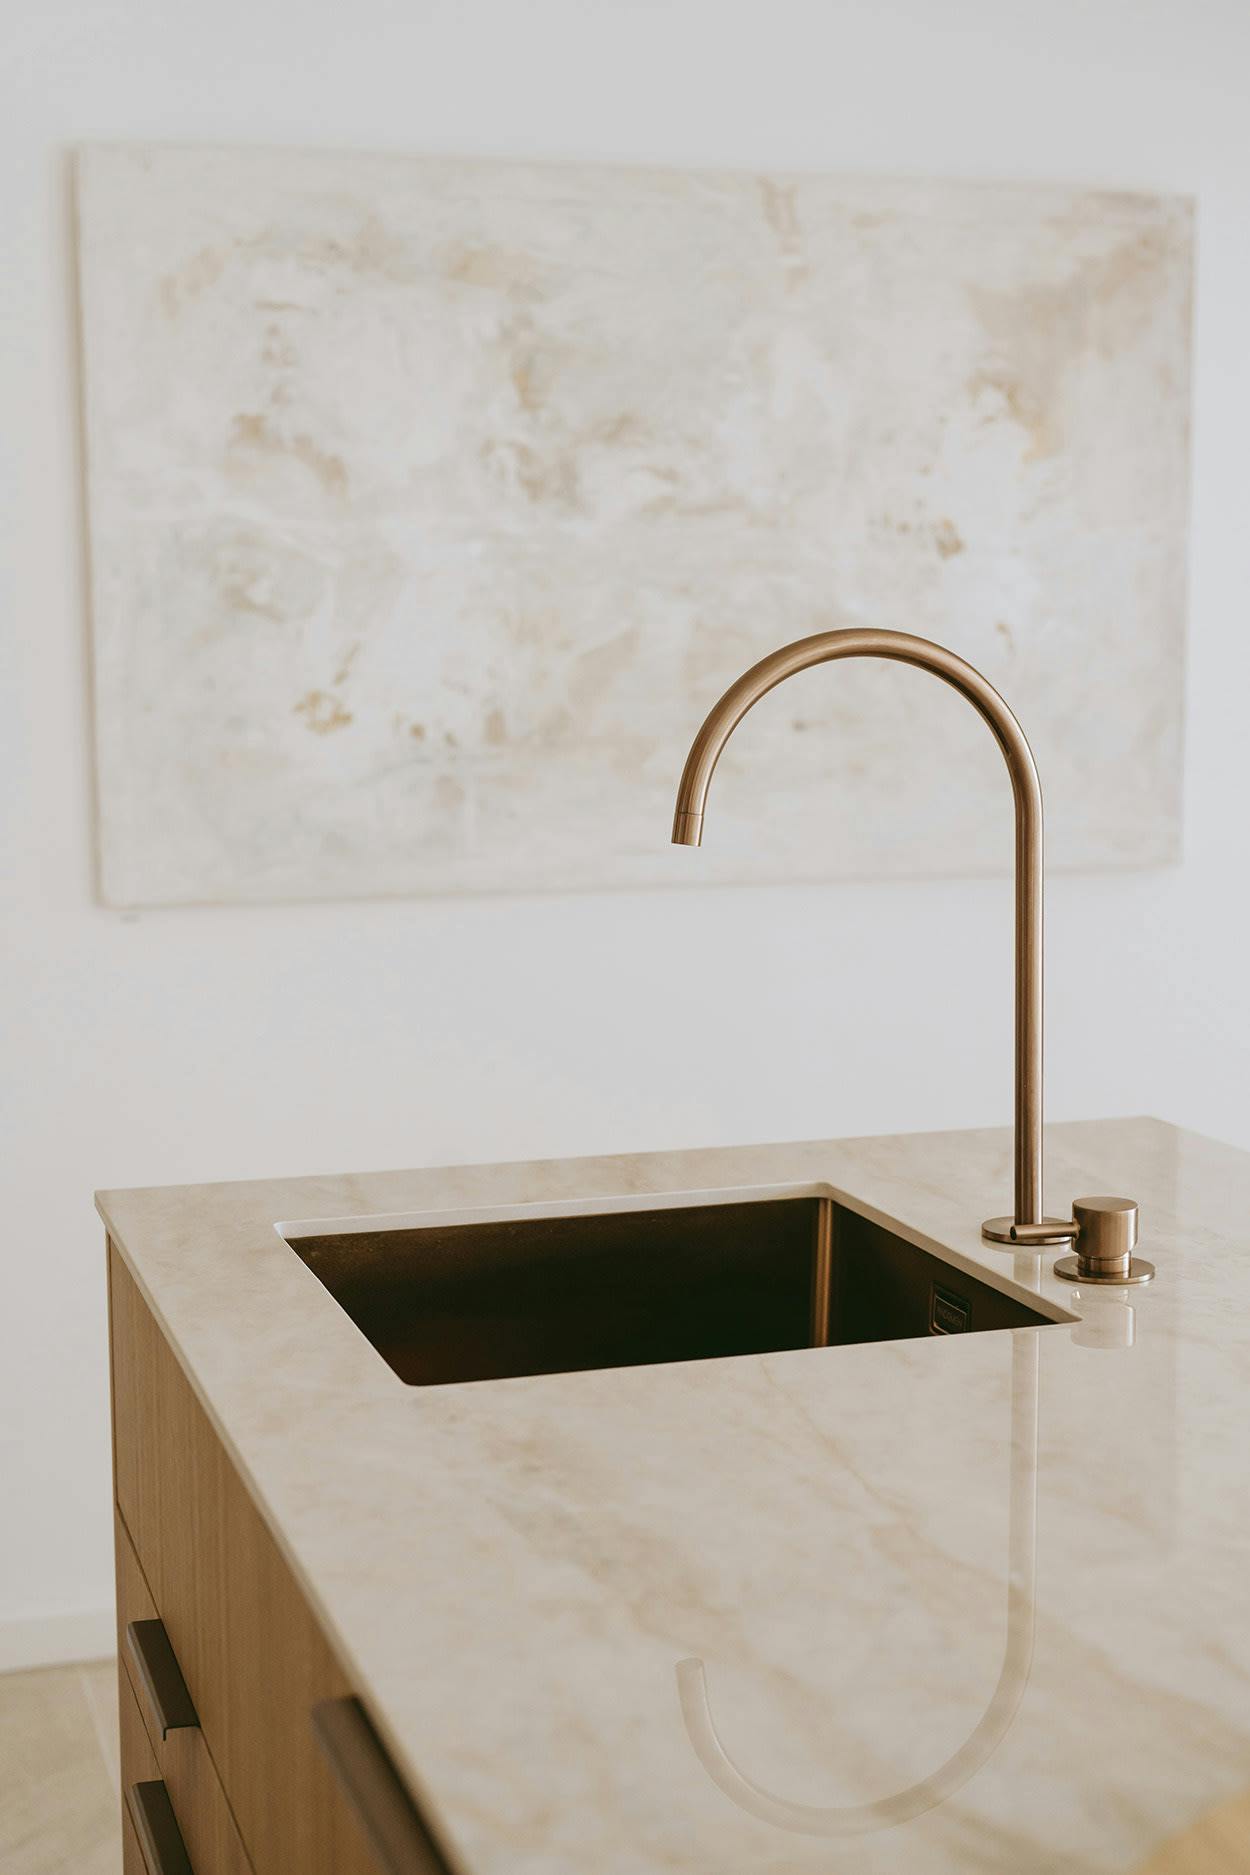 The image features a large, marble-like sink with a gold faucet, placed on a white countertop.